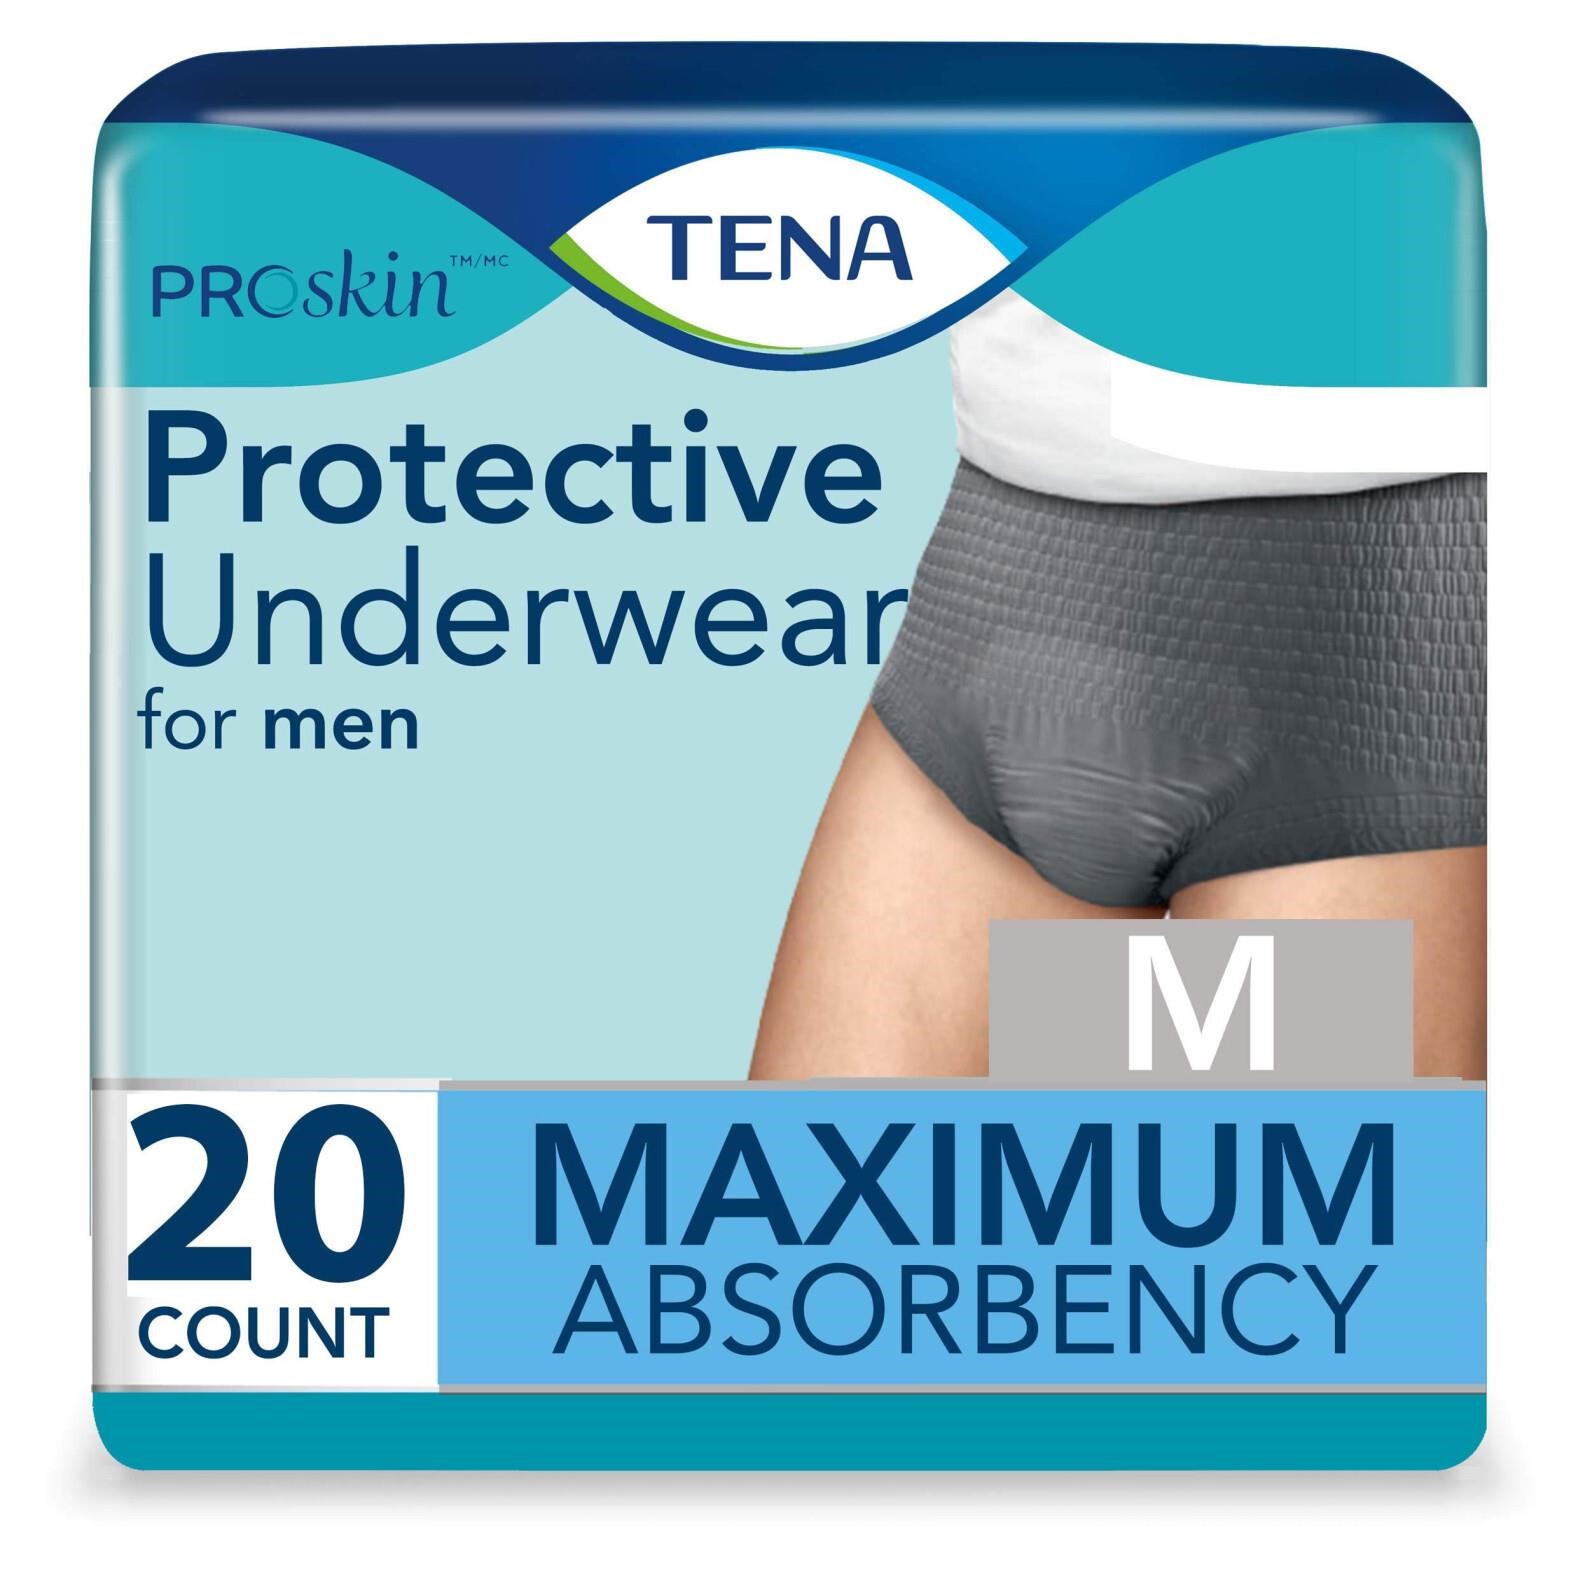 TENA ProSkin™ Protective Incontinence Underwear f